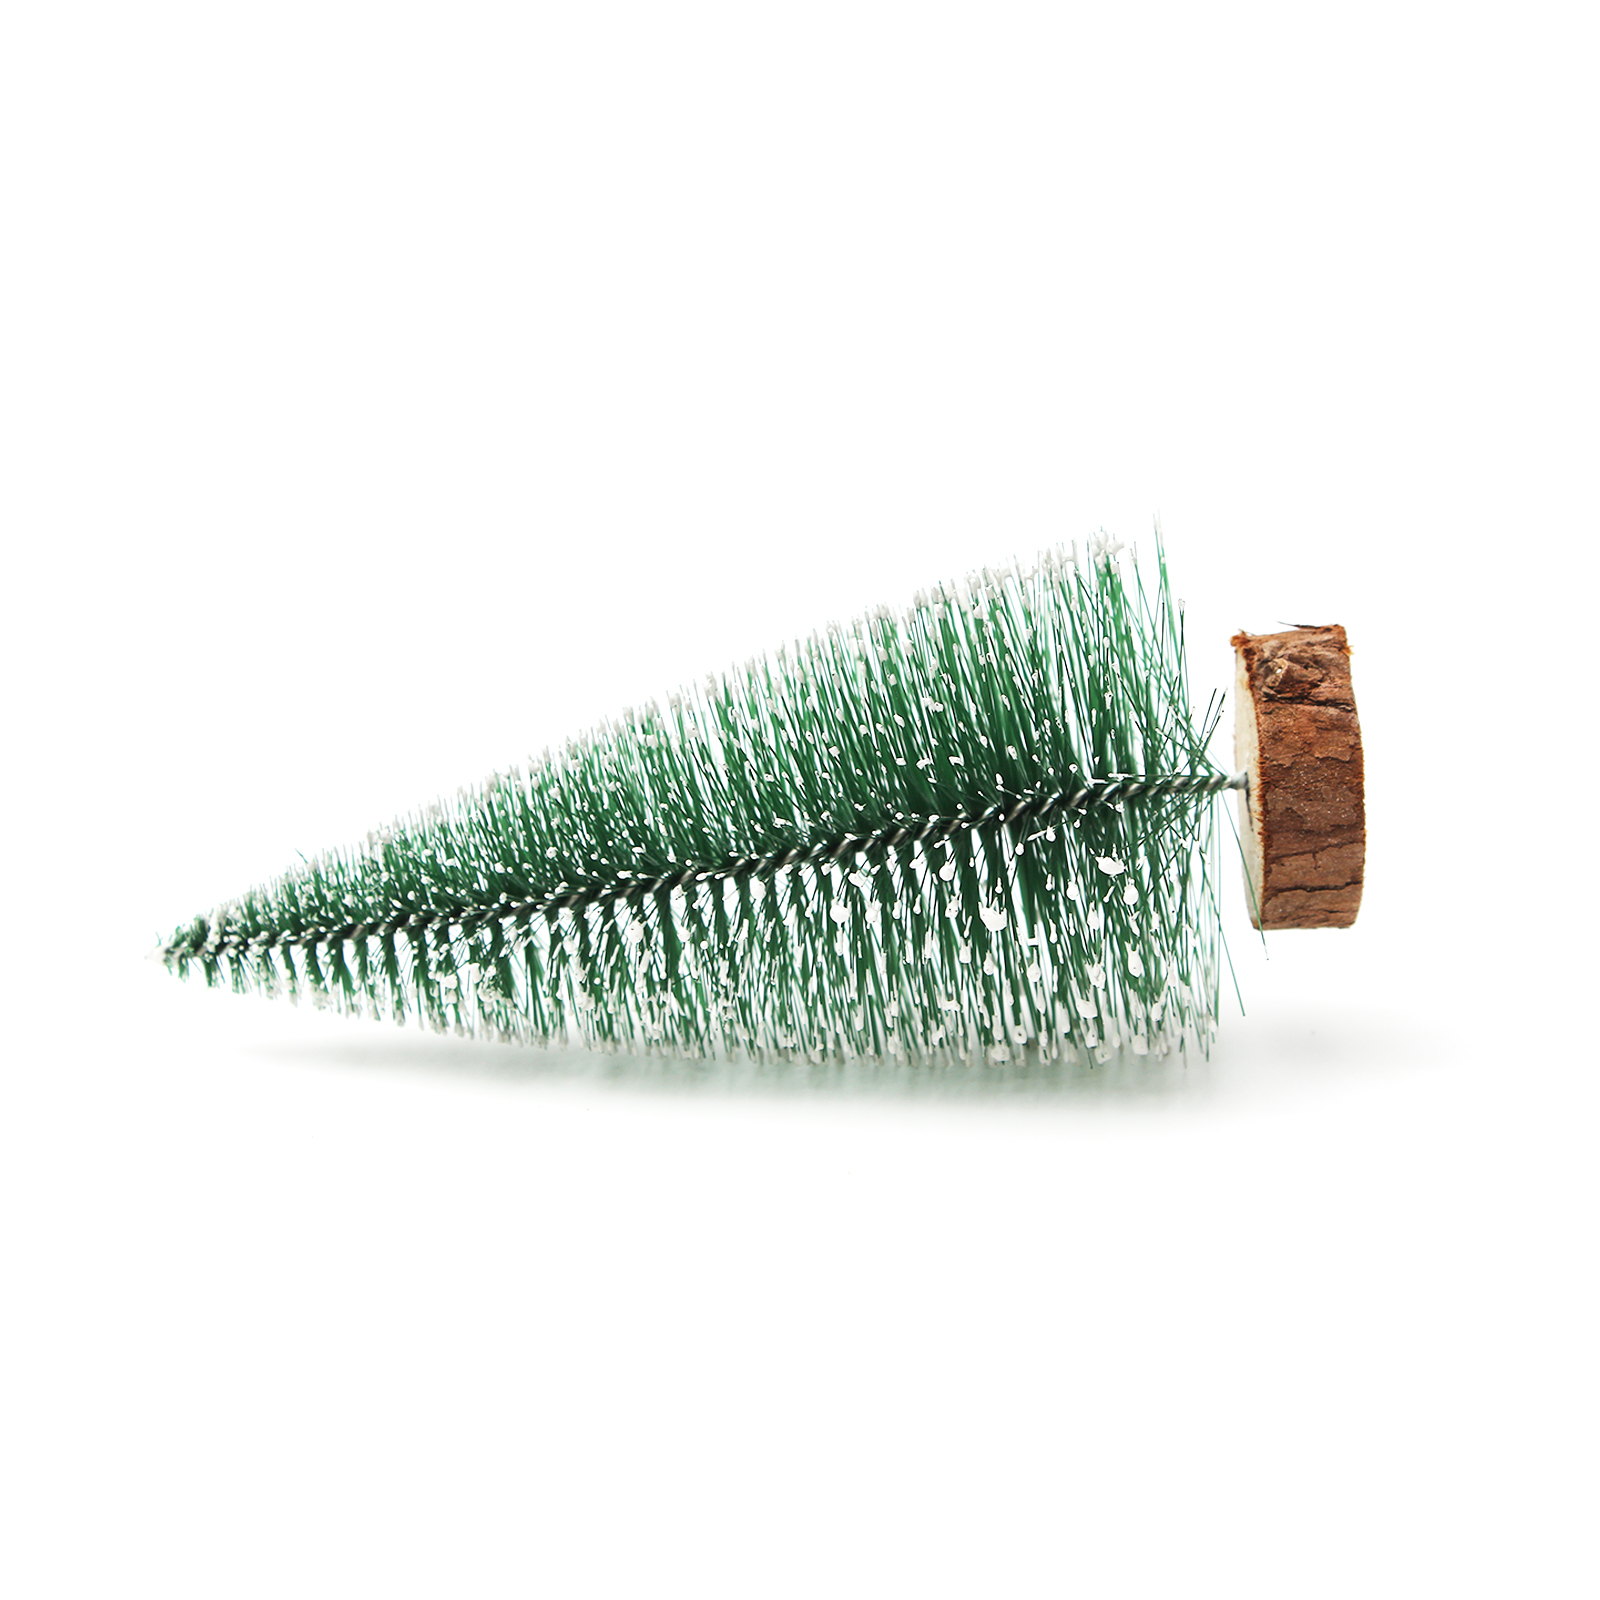 Laozai Christmas trees of synthetic material,Artificial Mini Christmas Trees, Miniature Sisal Frosted Christmas Trees Bottle Brush Trees for Xmas Home Tabletop Decor